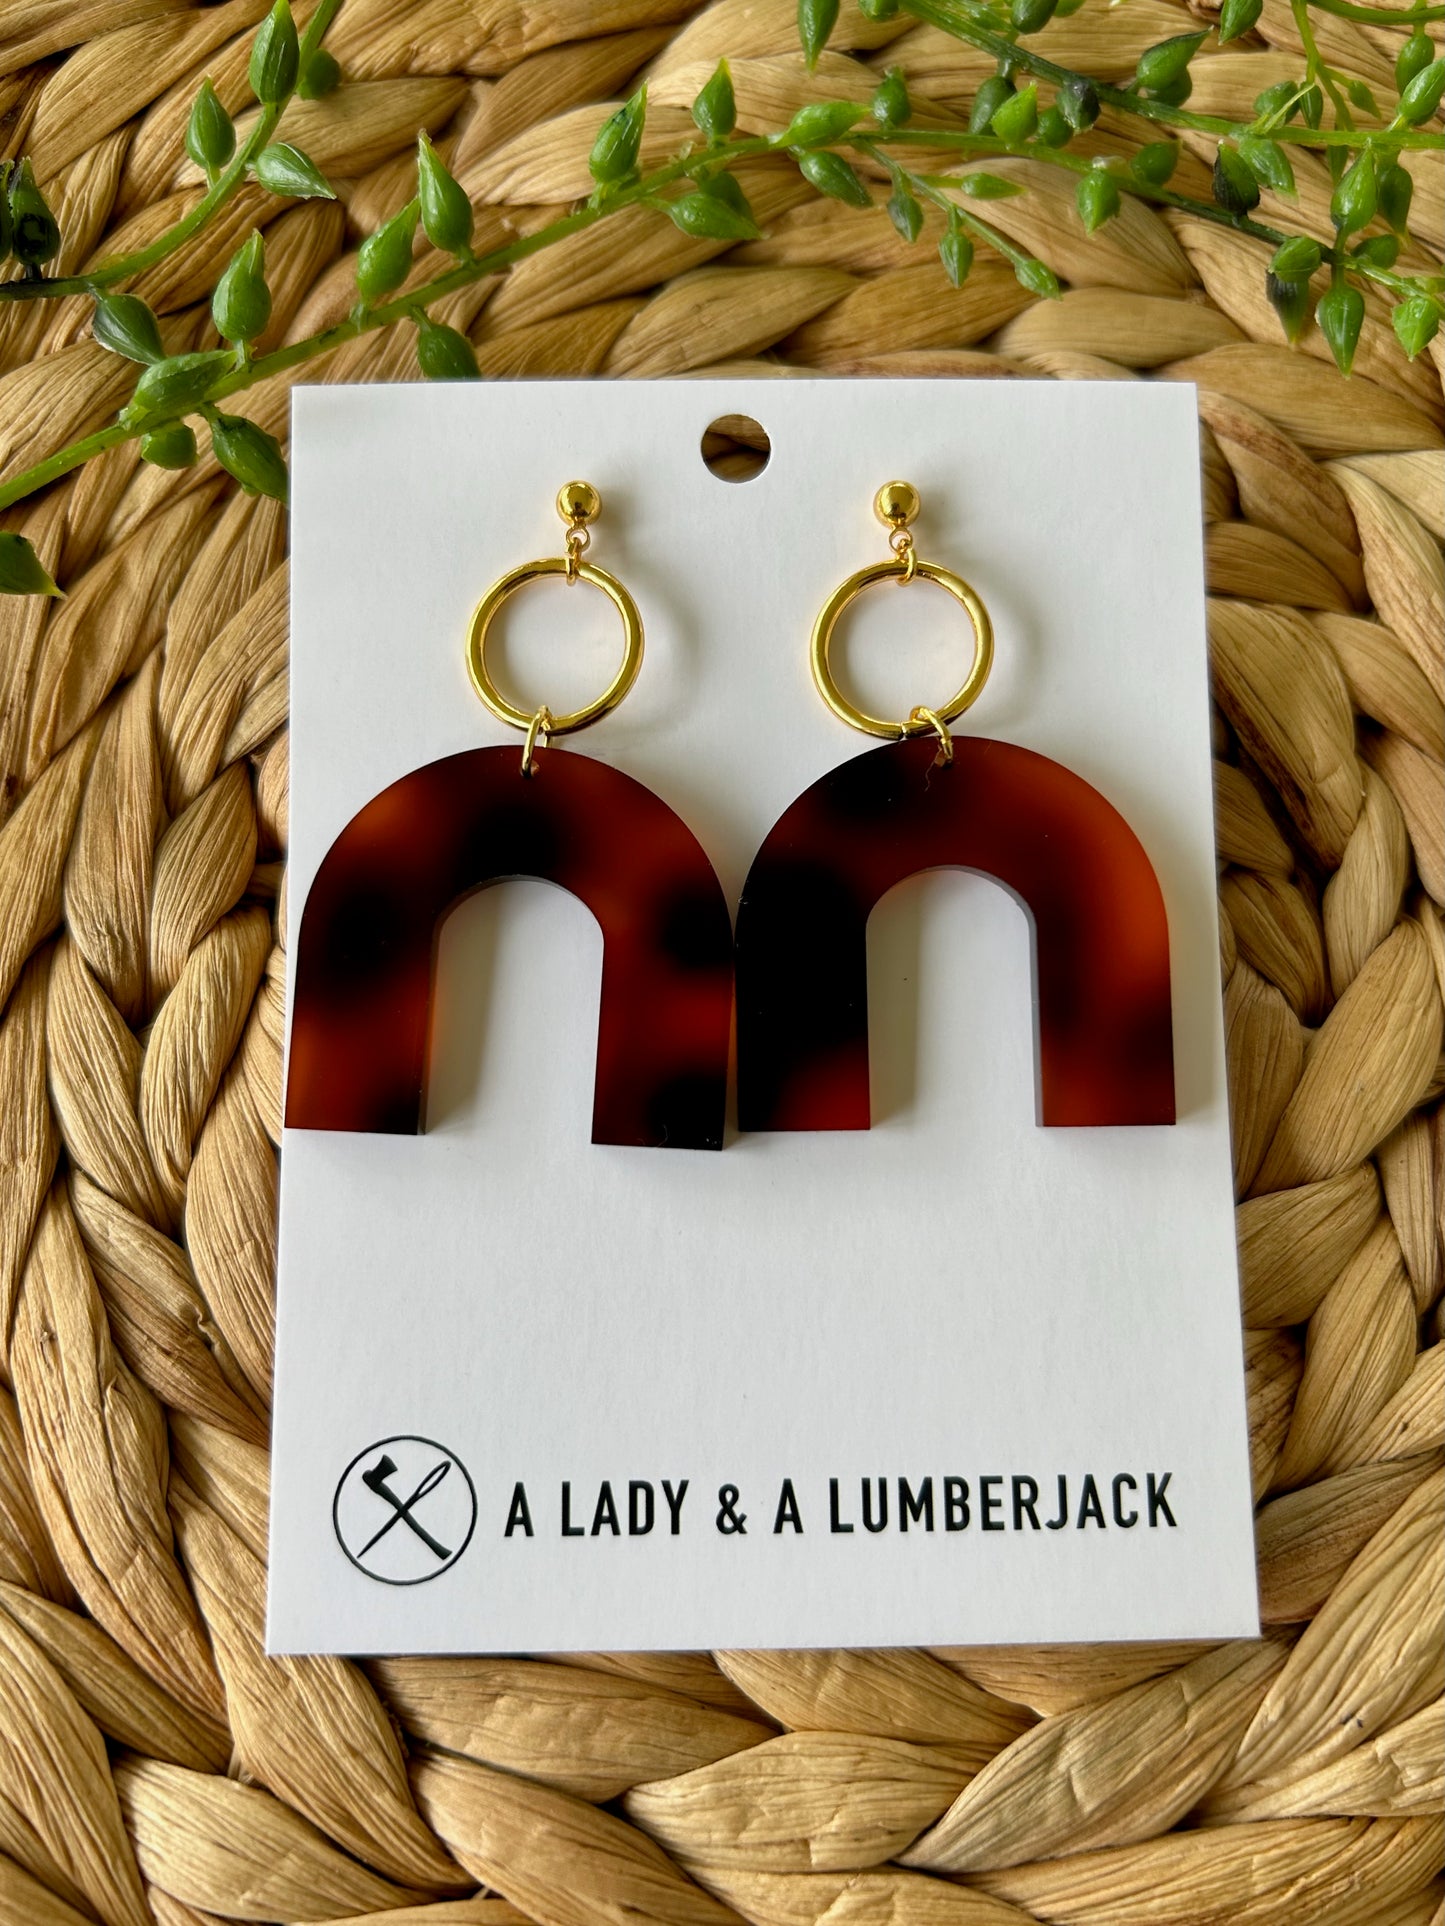 Tortoise Acrylic Arch Earrings with Gold Post Studs